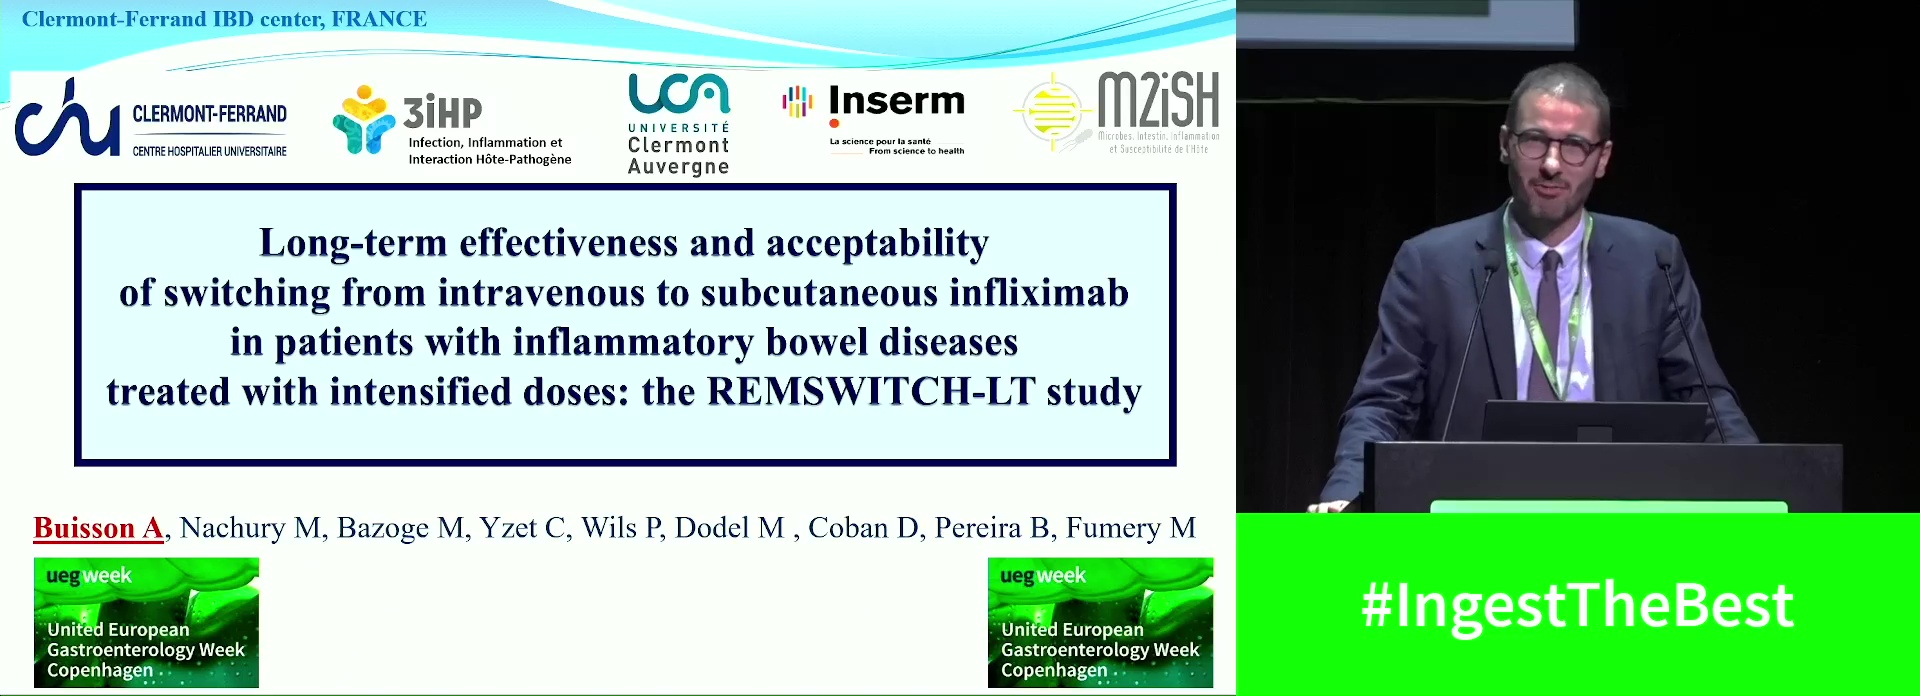 LONG-TERM EFFECTIVENESS AND ACCEPTABILITY OF SWITCHING FROM INTRAVENOUS TO SUBCUTANEOUS INFLIXIMAB IN PATIENTS WITH INFLAMMATORY BOWEL DISEASES: THE REMSWITCH-LT STUDY